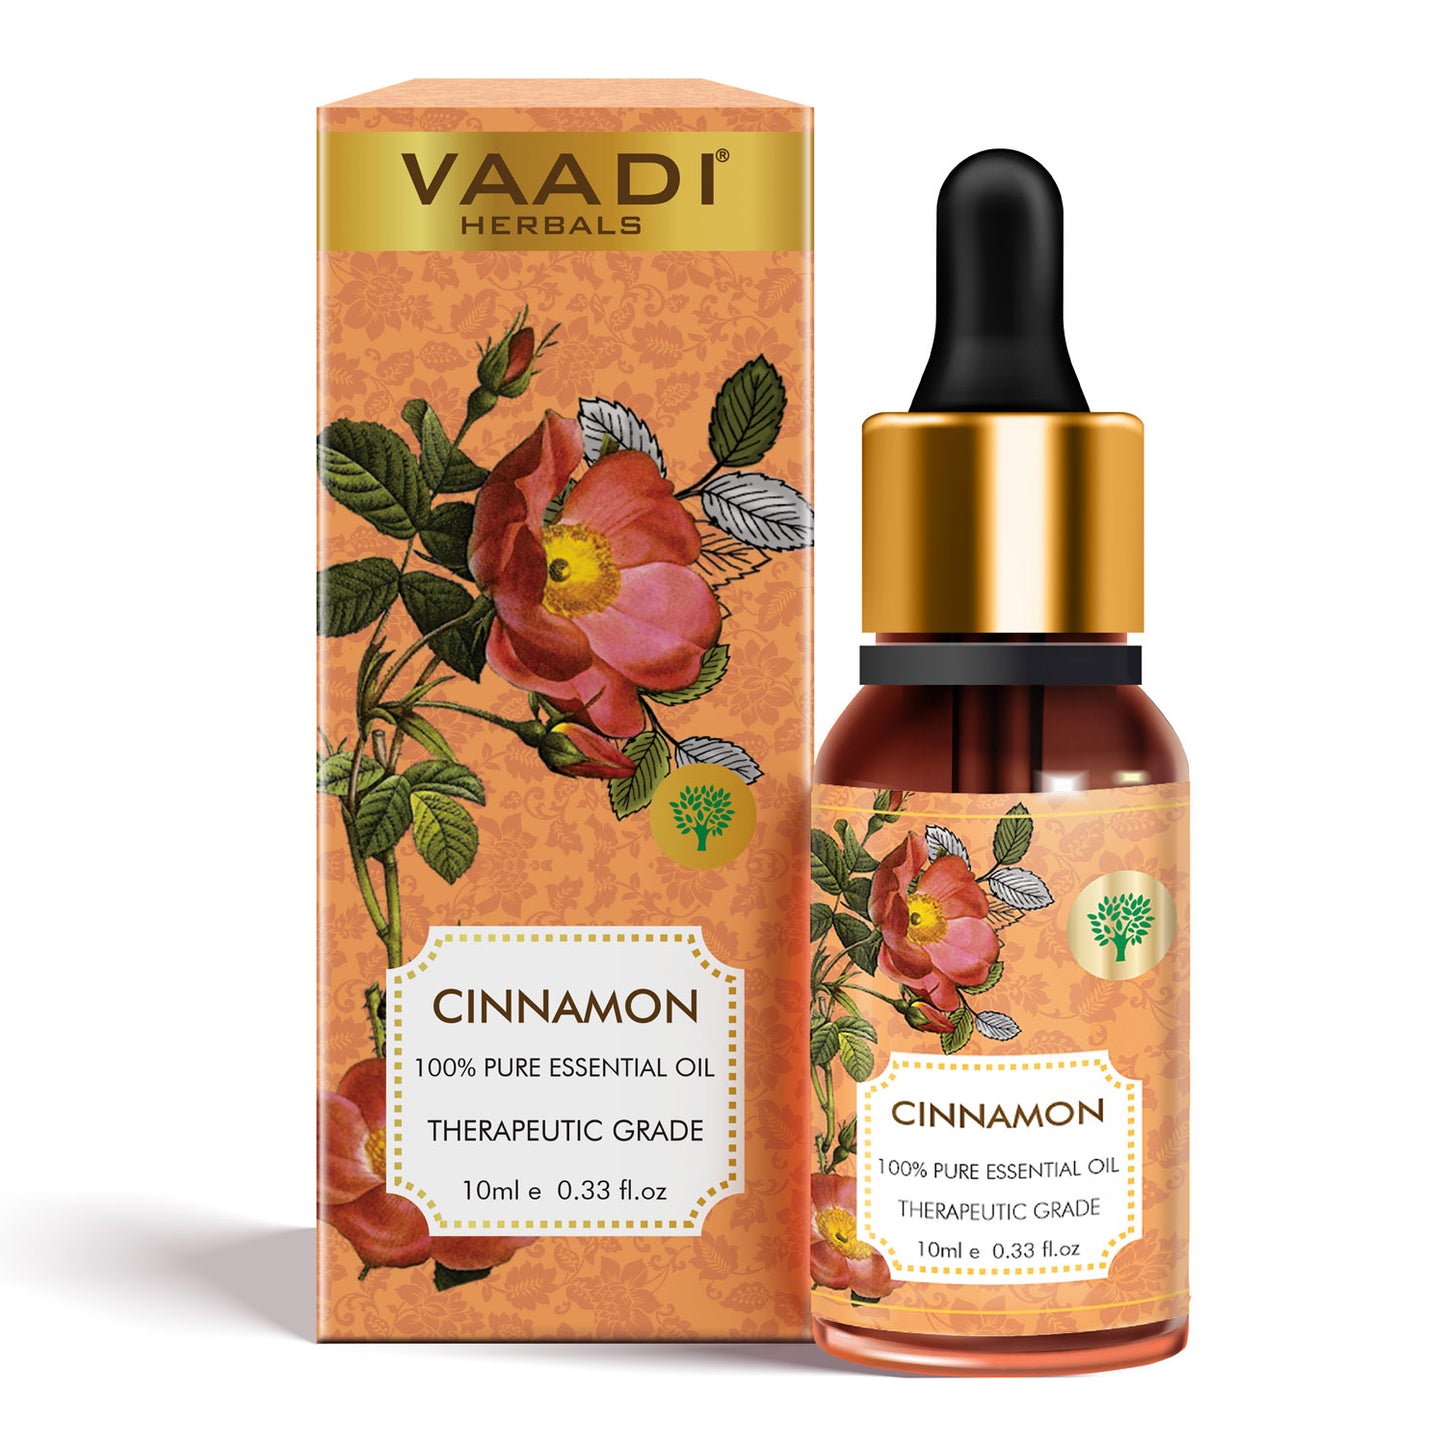 Cinnamon Essential Oil - Soothes Skin Inflammation, Relieves Stress & Anxiety & Improves Concentration - 100% Pure Therapeutic Grade (10 ml)